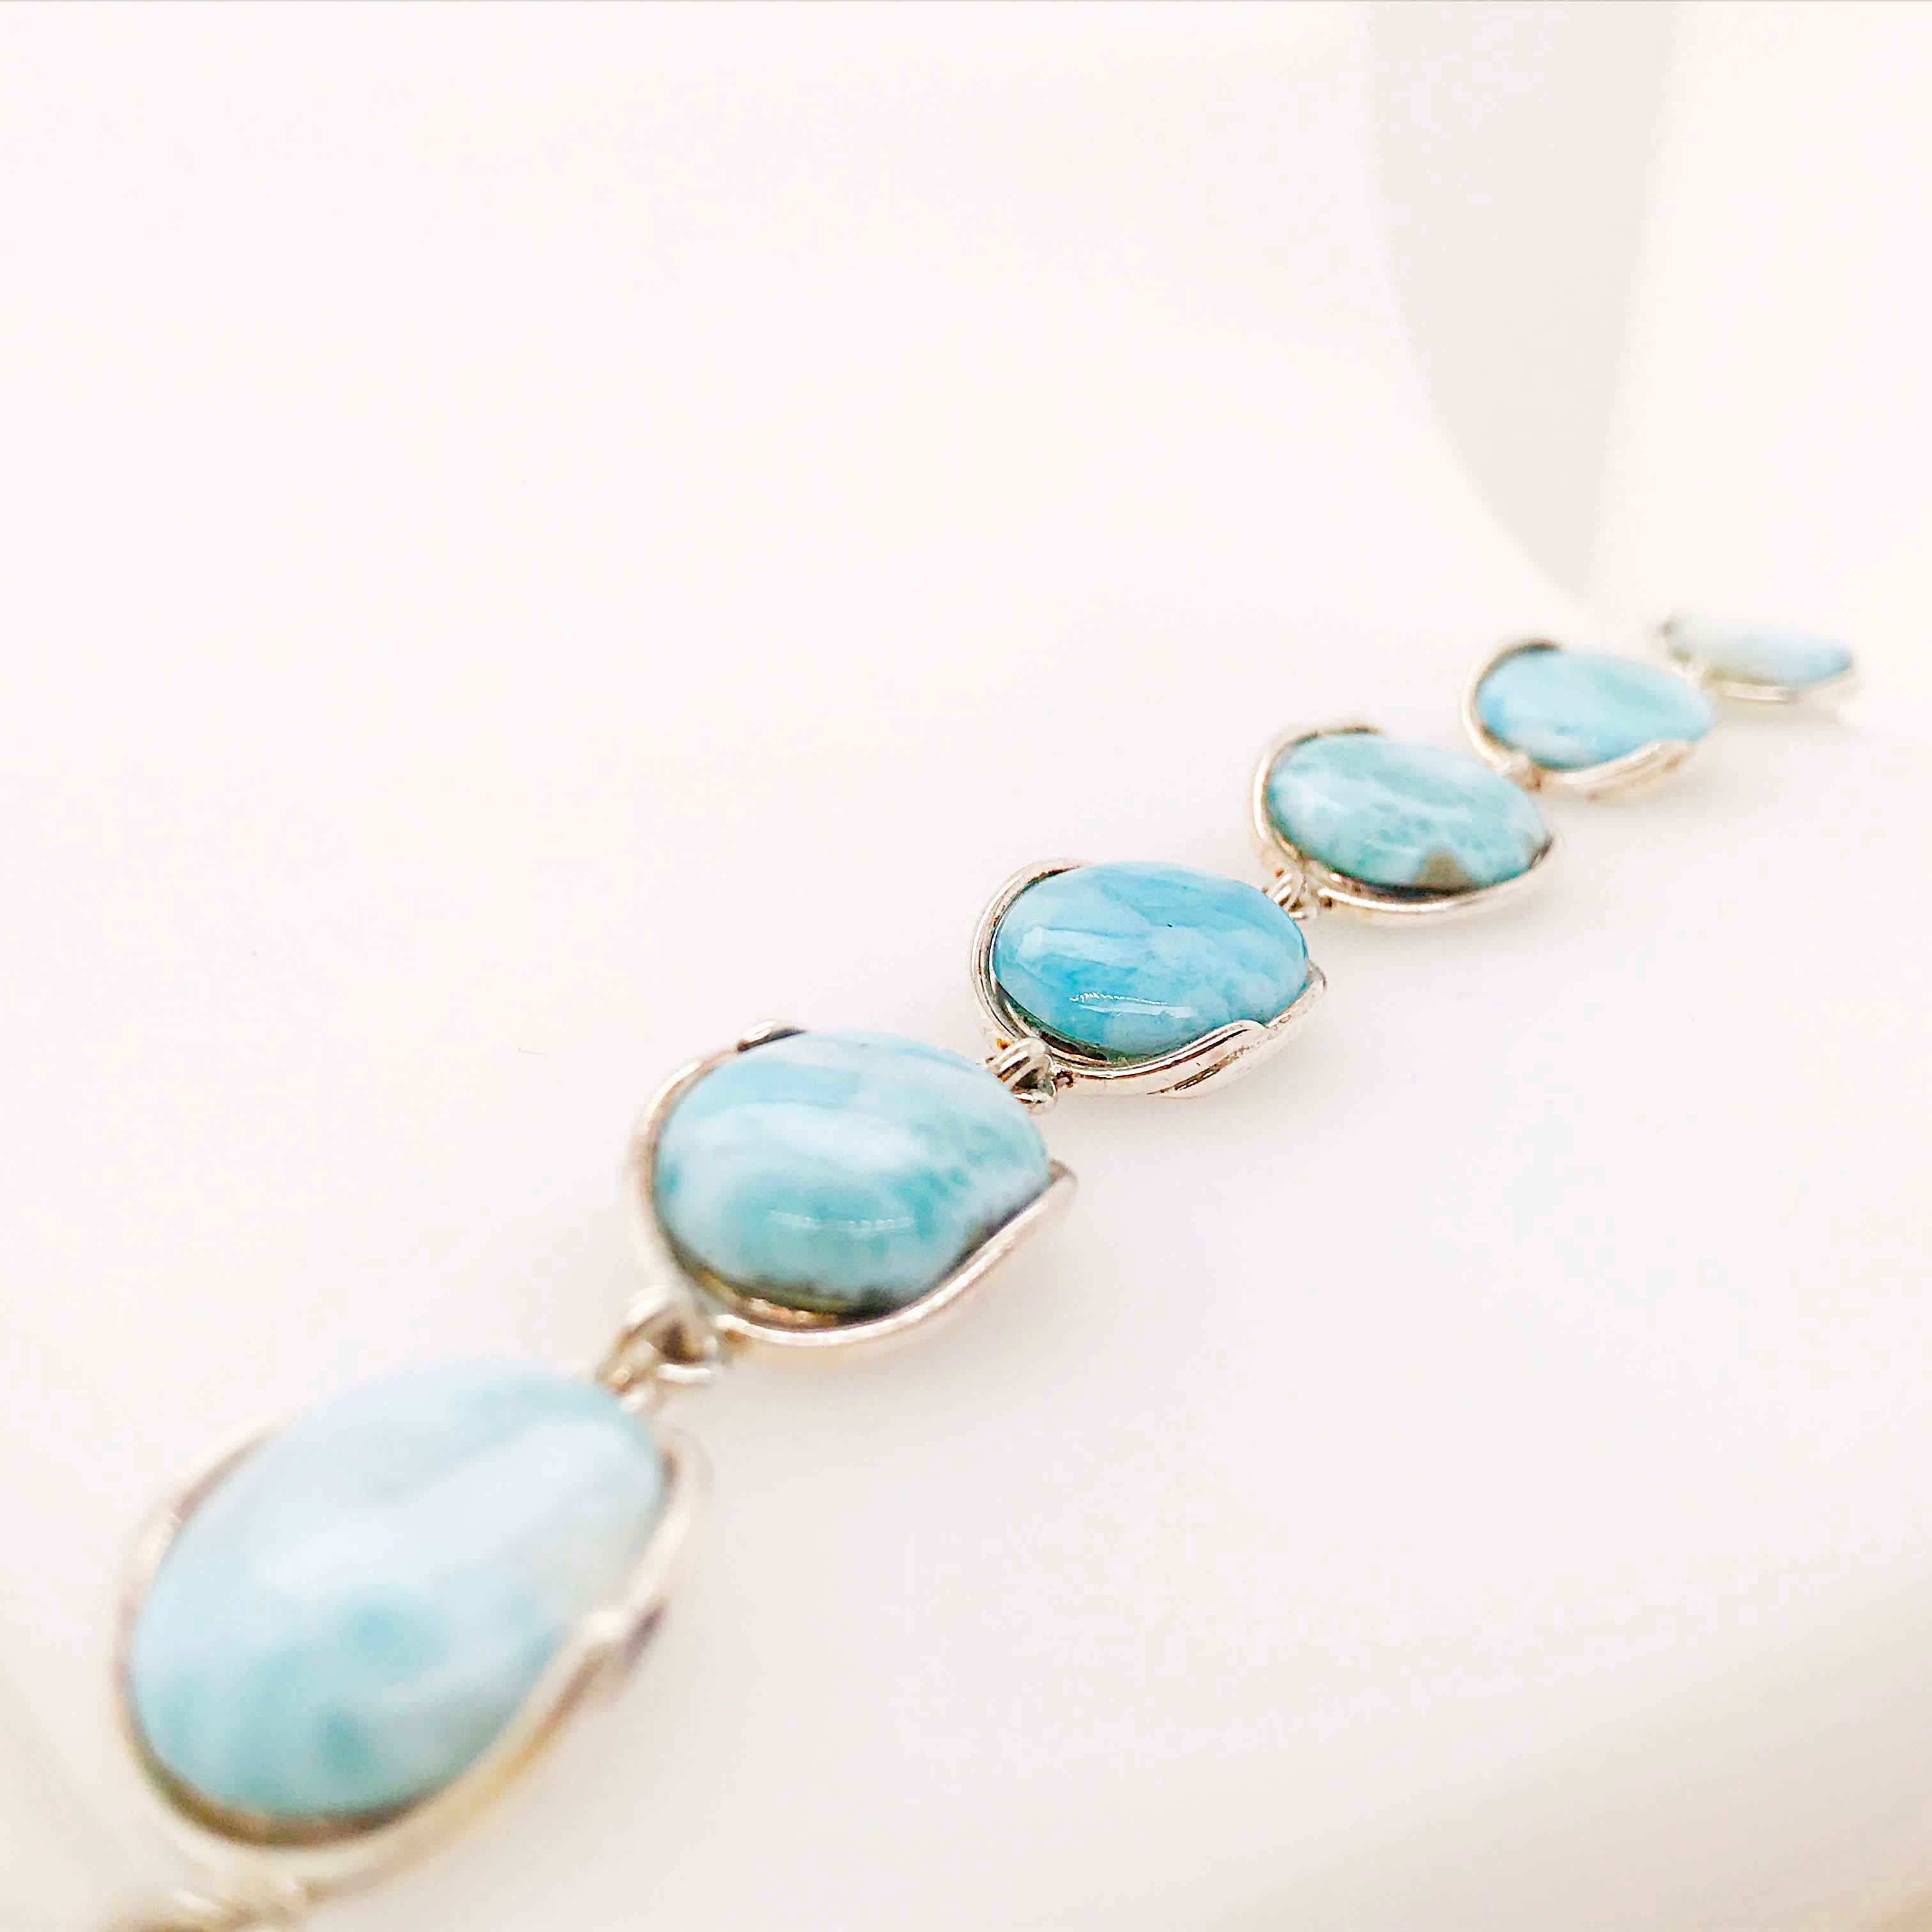 The precious genuine Larimar gemstone bracelet is a statement piece. Made with genuine Larimar gemstone pieces that have been hand polished and show the Larimar's true ocean blue colors and unique color spread. Larimar is a healing stone that